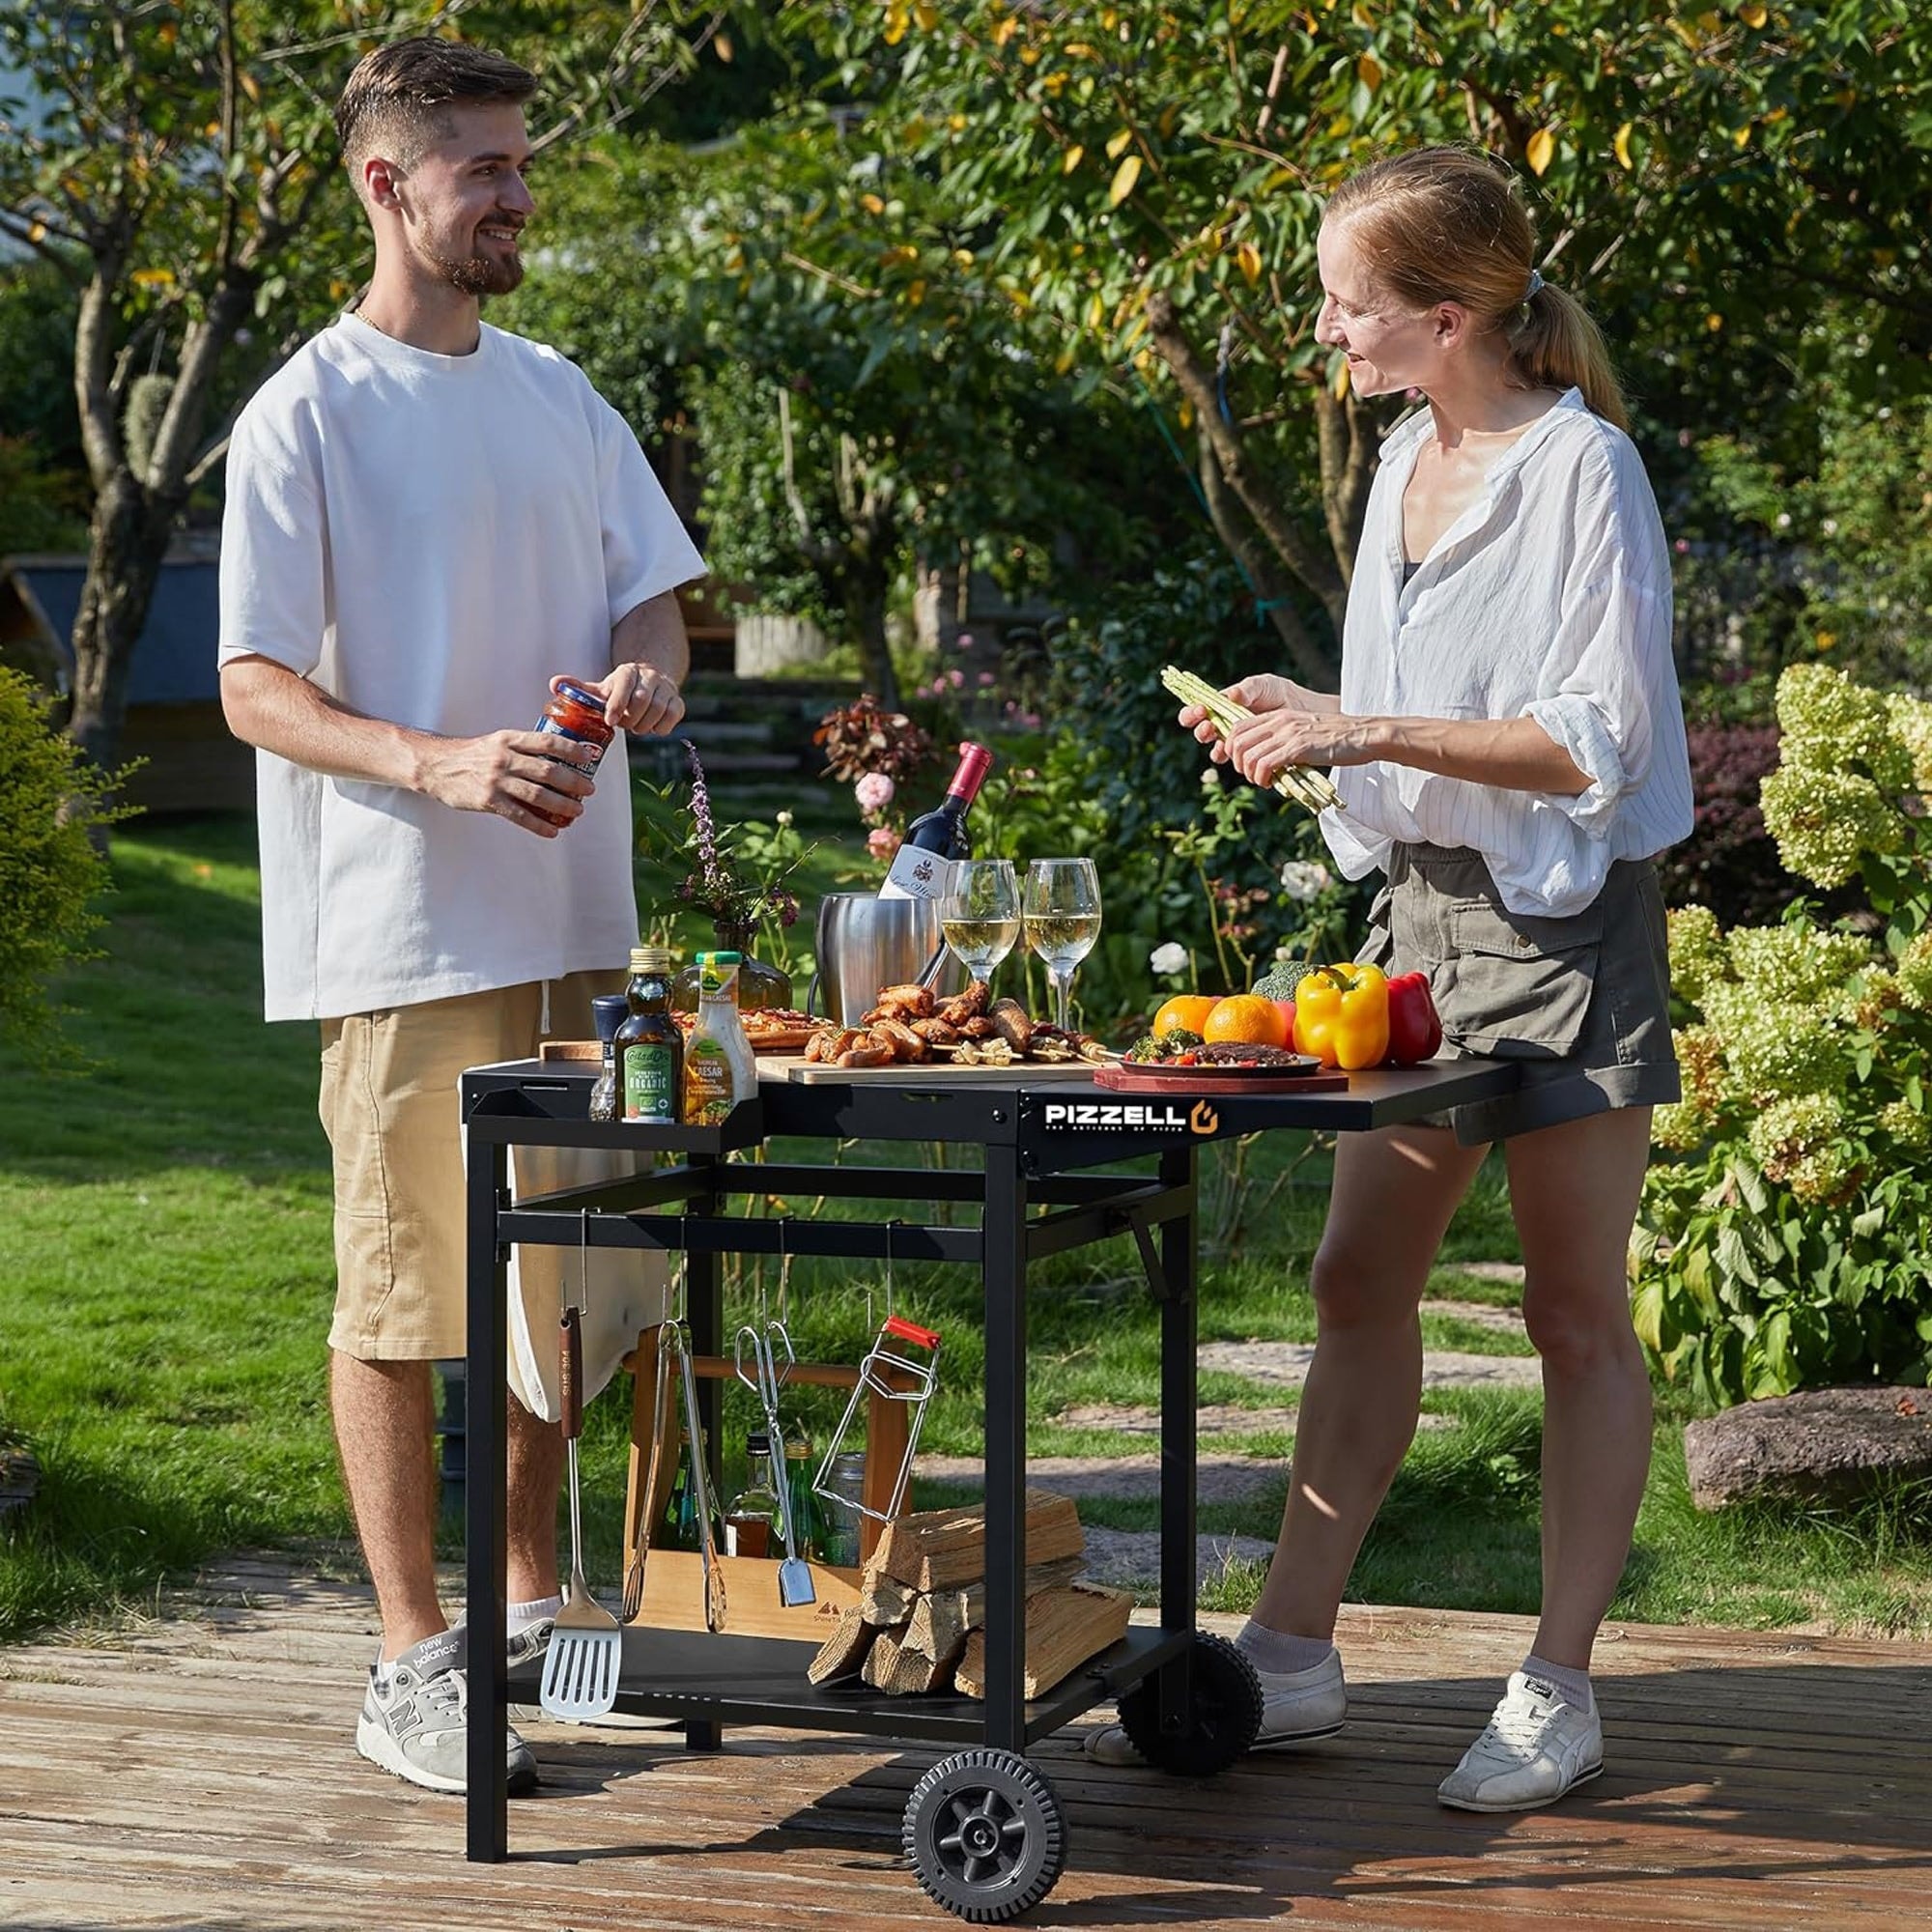 https://ak1.ostkcdn.com/images/products/is/images/direct/cedf2a0cff37dc5d5589e09c24b1318c043ddddb/Pizzello-Outdoor-Grill-Dining-Cart-Pizza-Oven-Trolley-BBQ-Stand.jpg